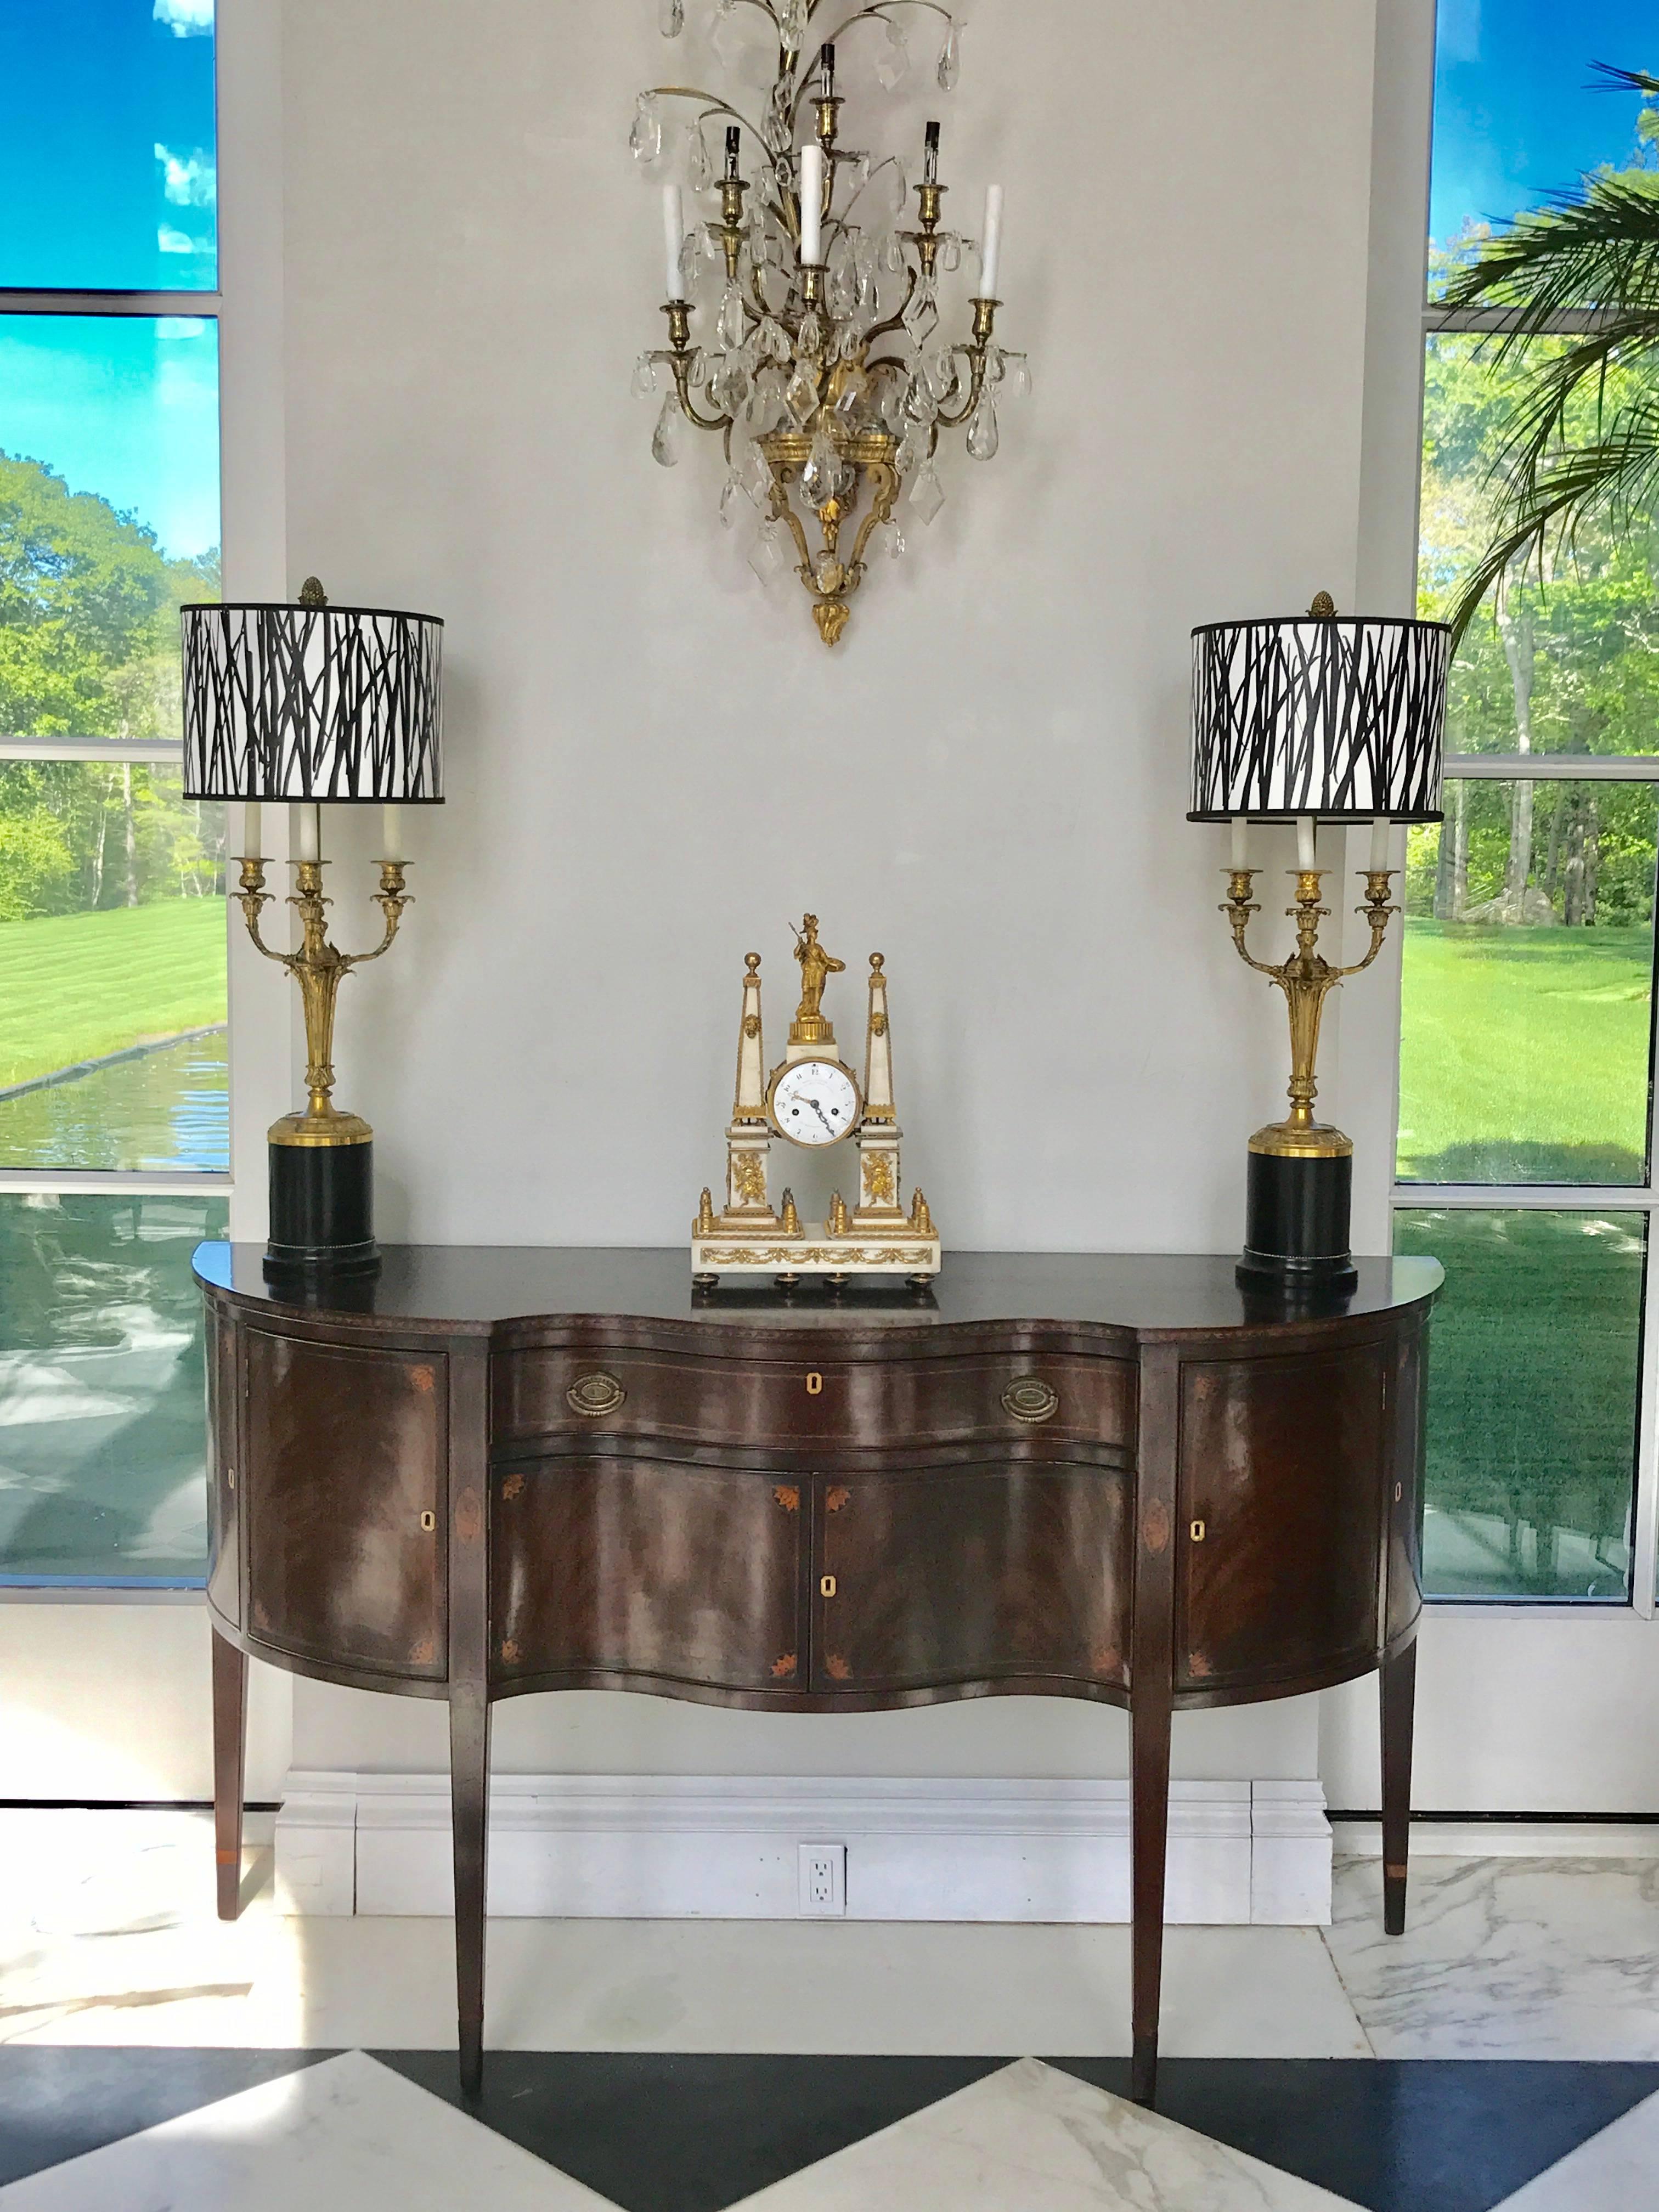 This magnificent Louis XVI period overmantel cock was made by Charles Bertrand in Paris, circa 1790. It is constructed like an architectural monument consisting of two Obelisks on top of Plinths highly decorated in ormolu mounts of Trophies.